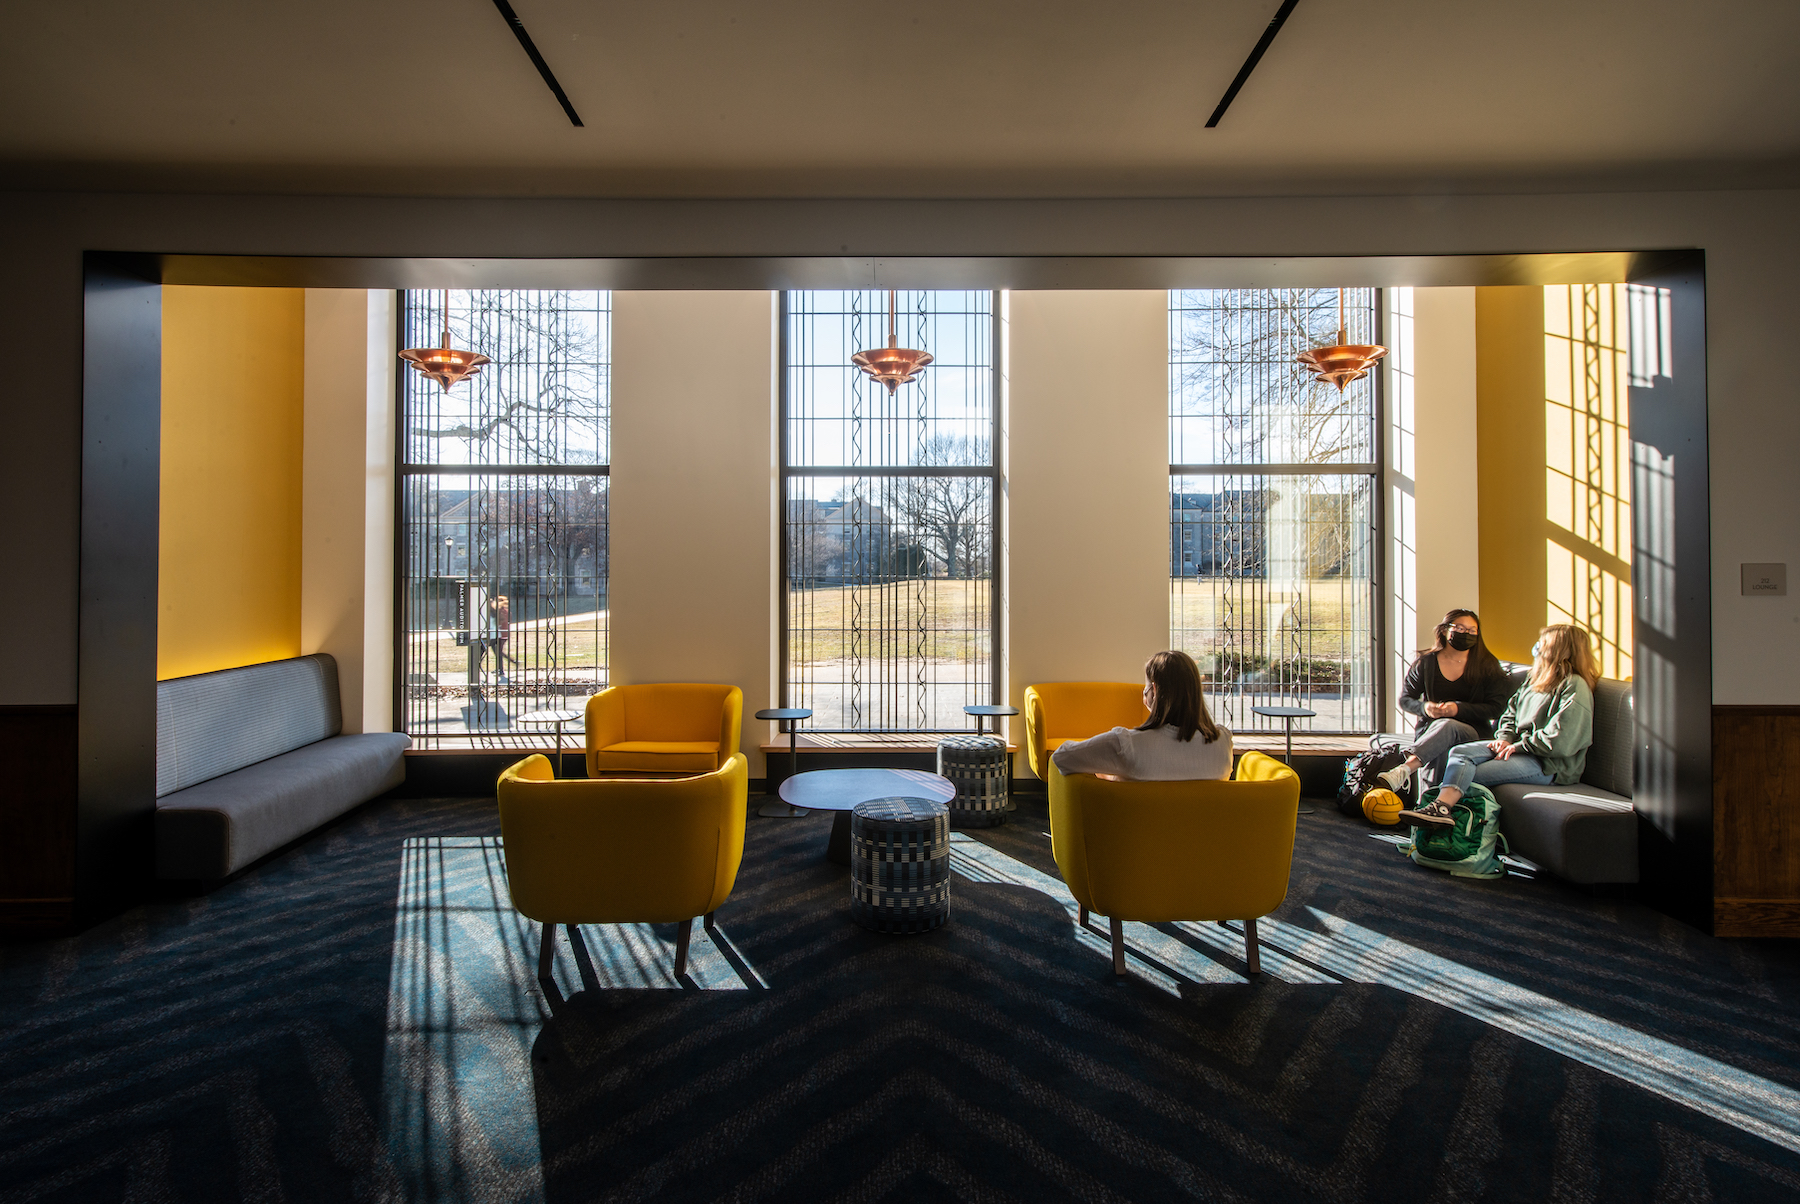 Building lobby features new furniture and large windows